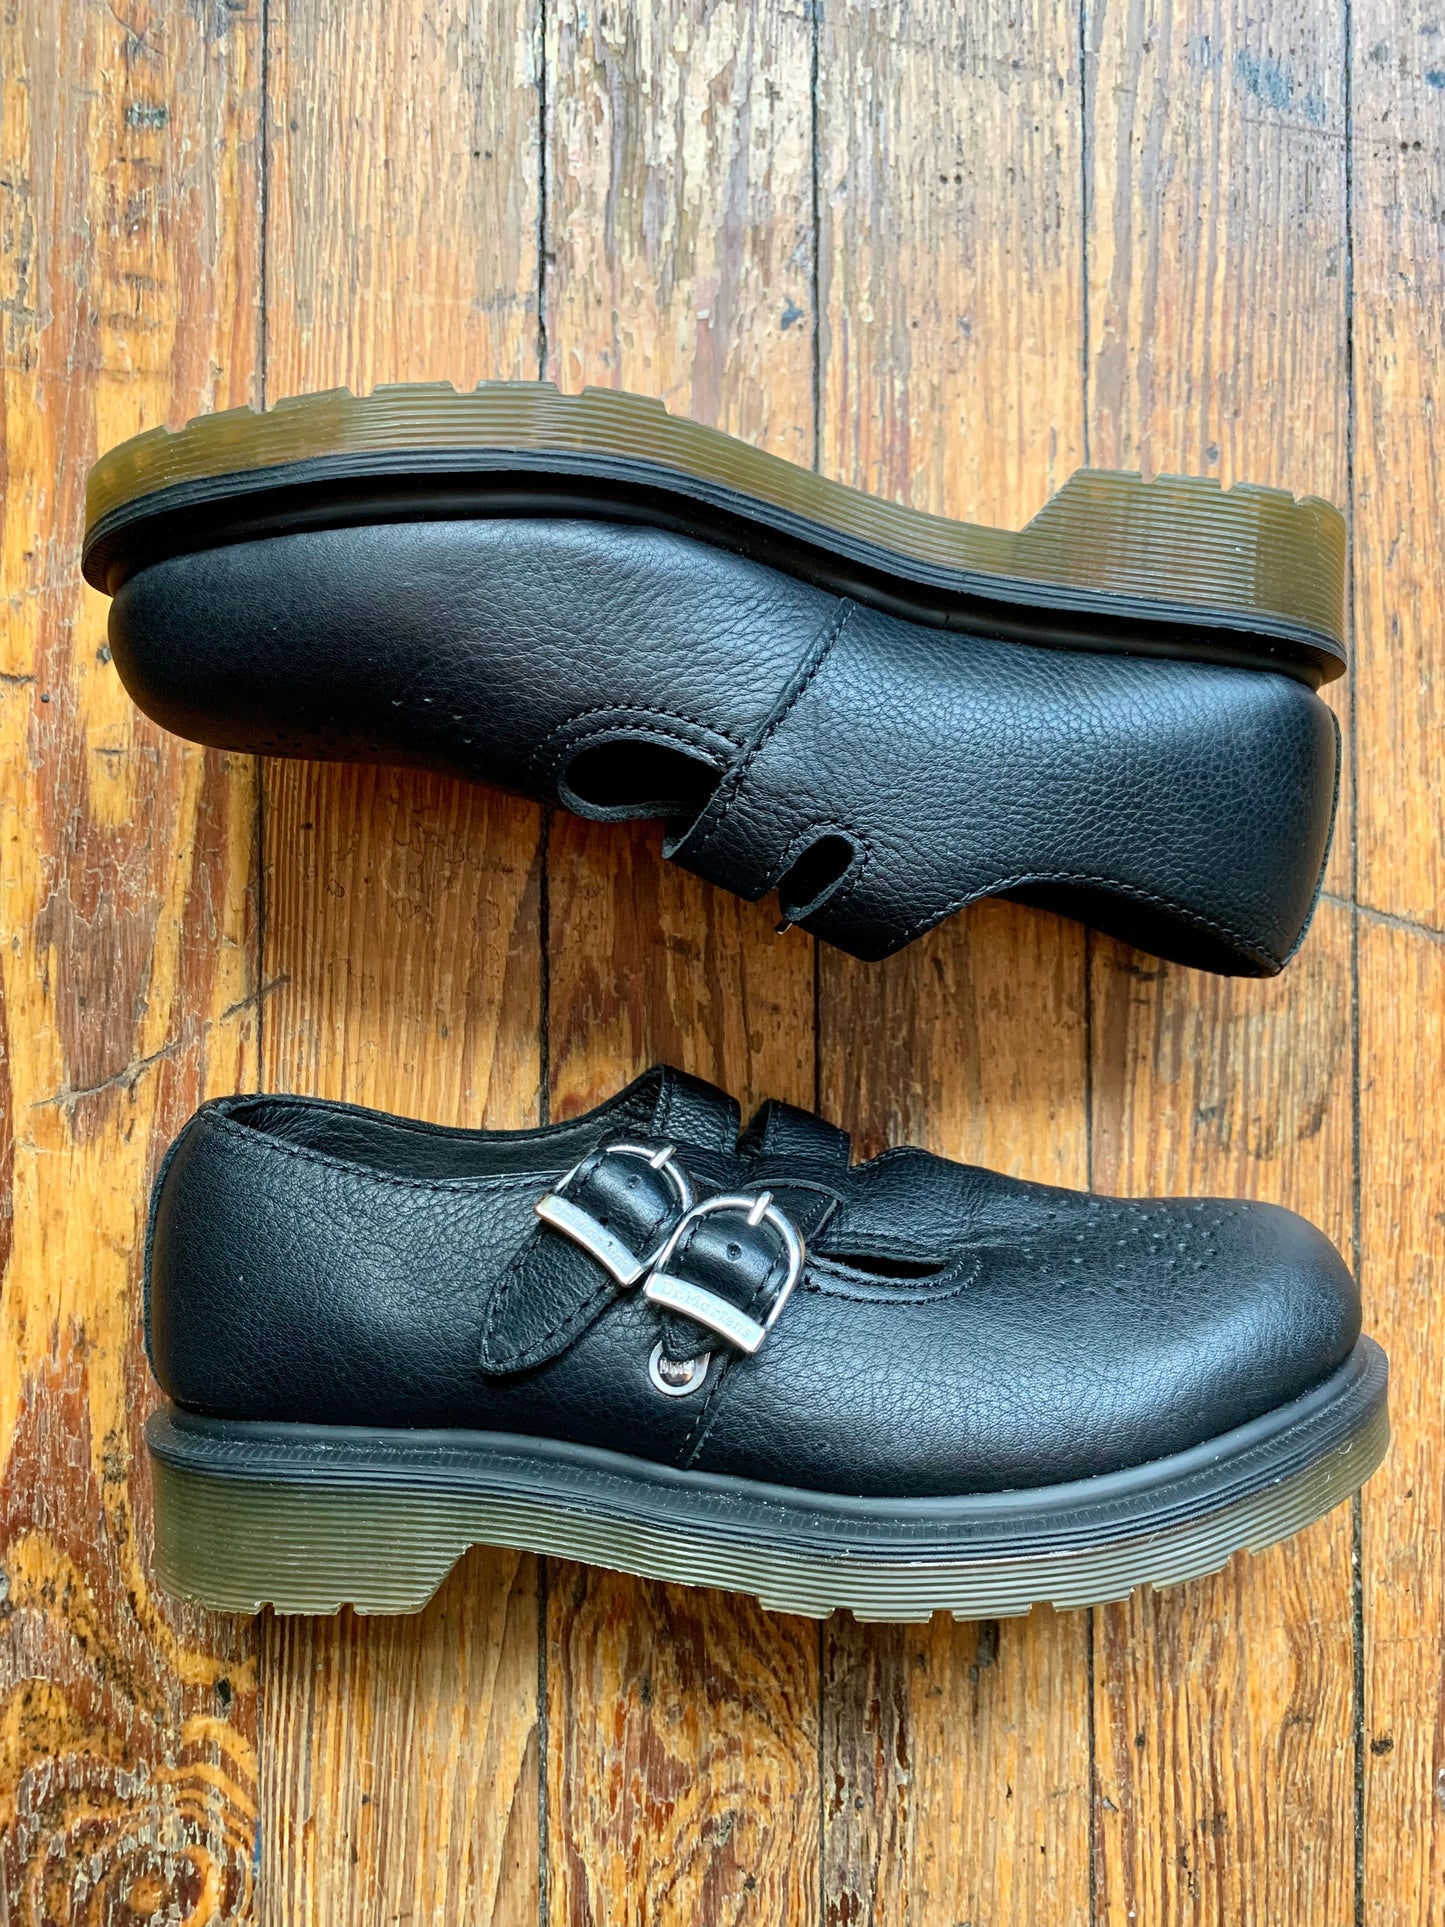 Brand New Doc Martens Mary Janes